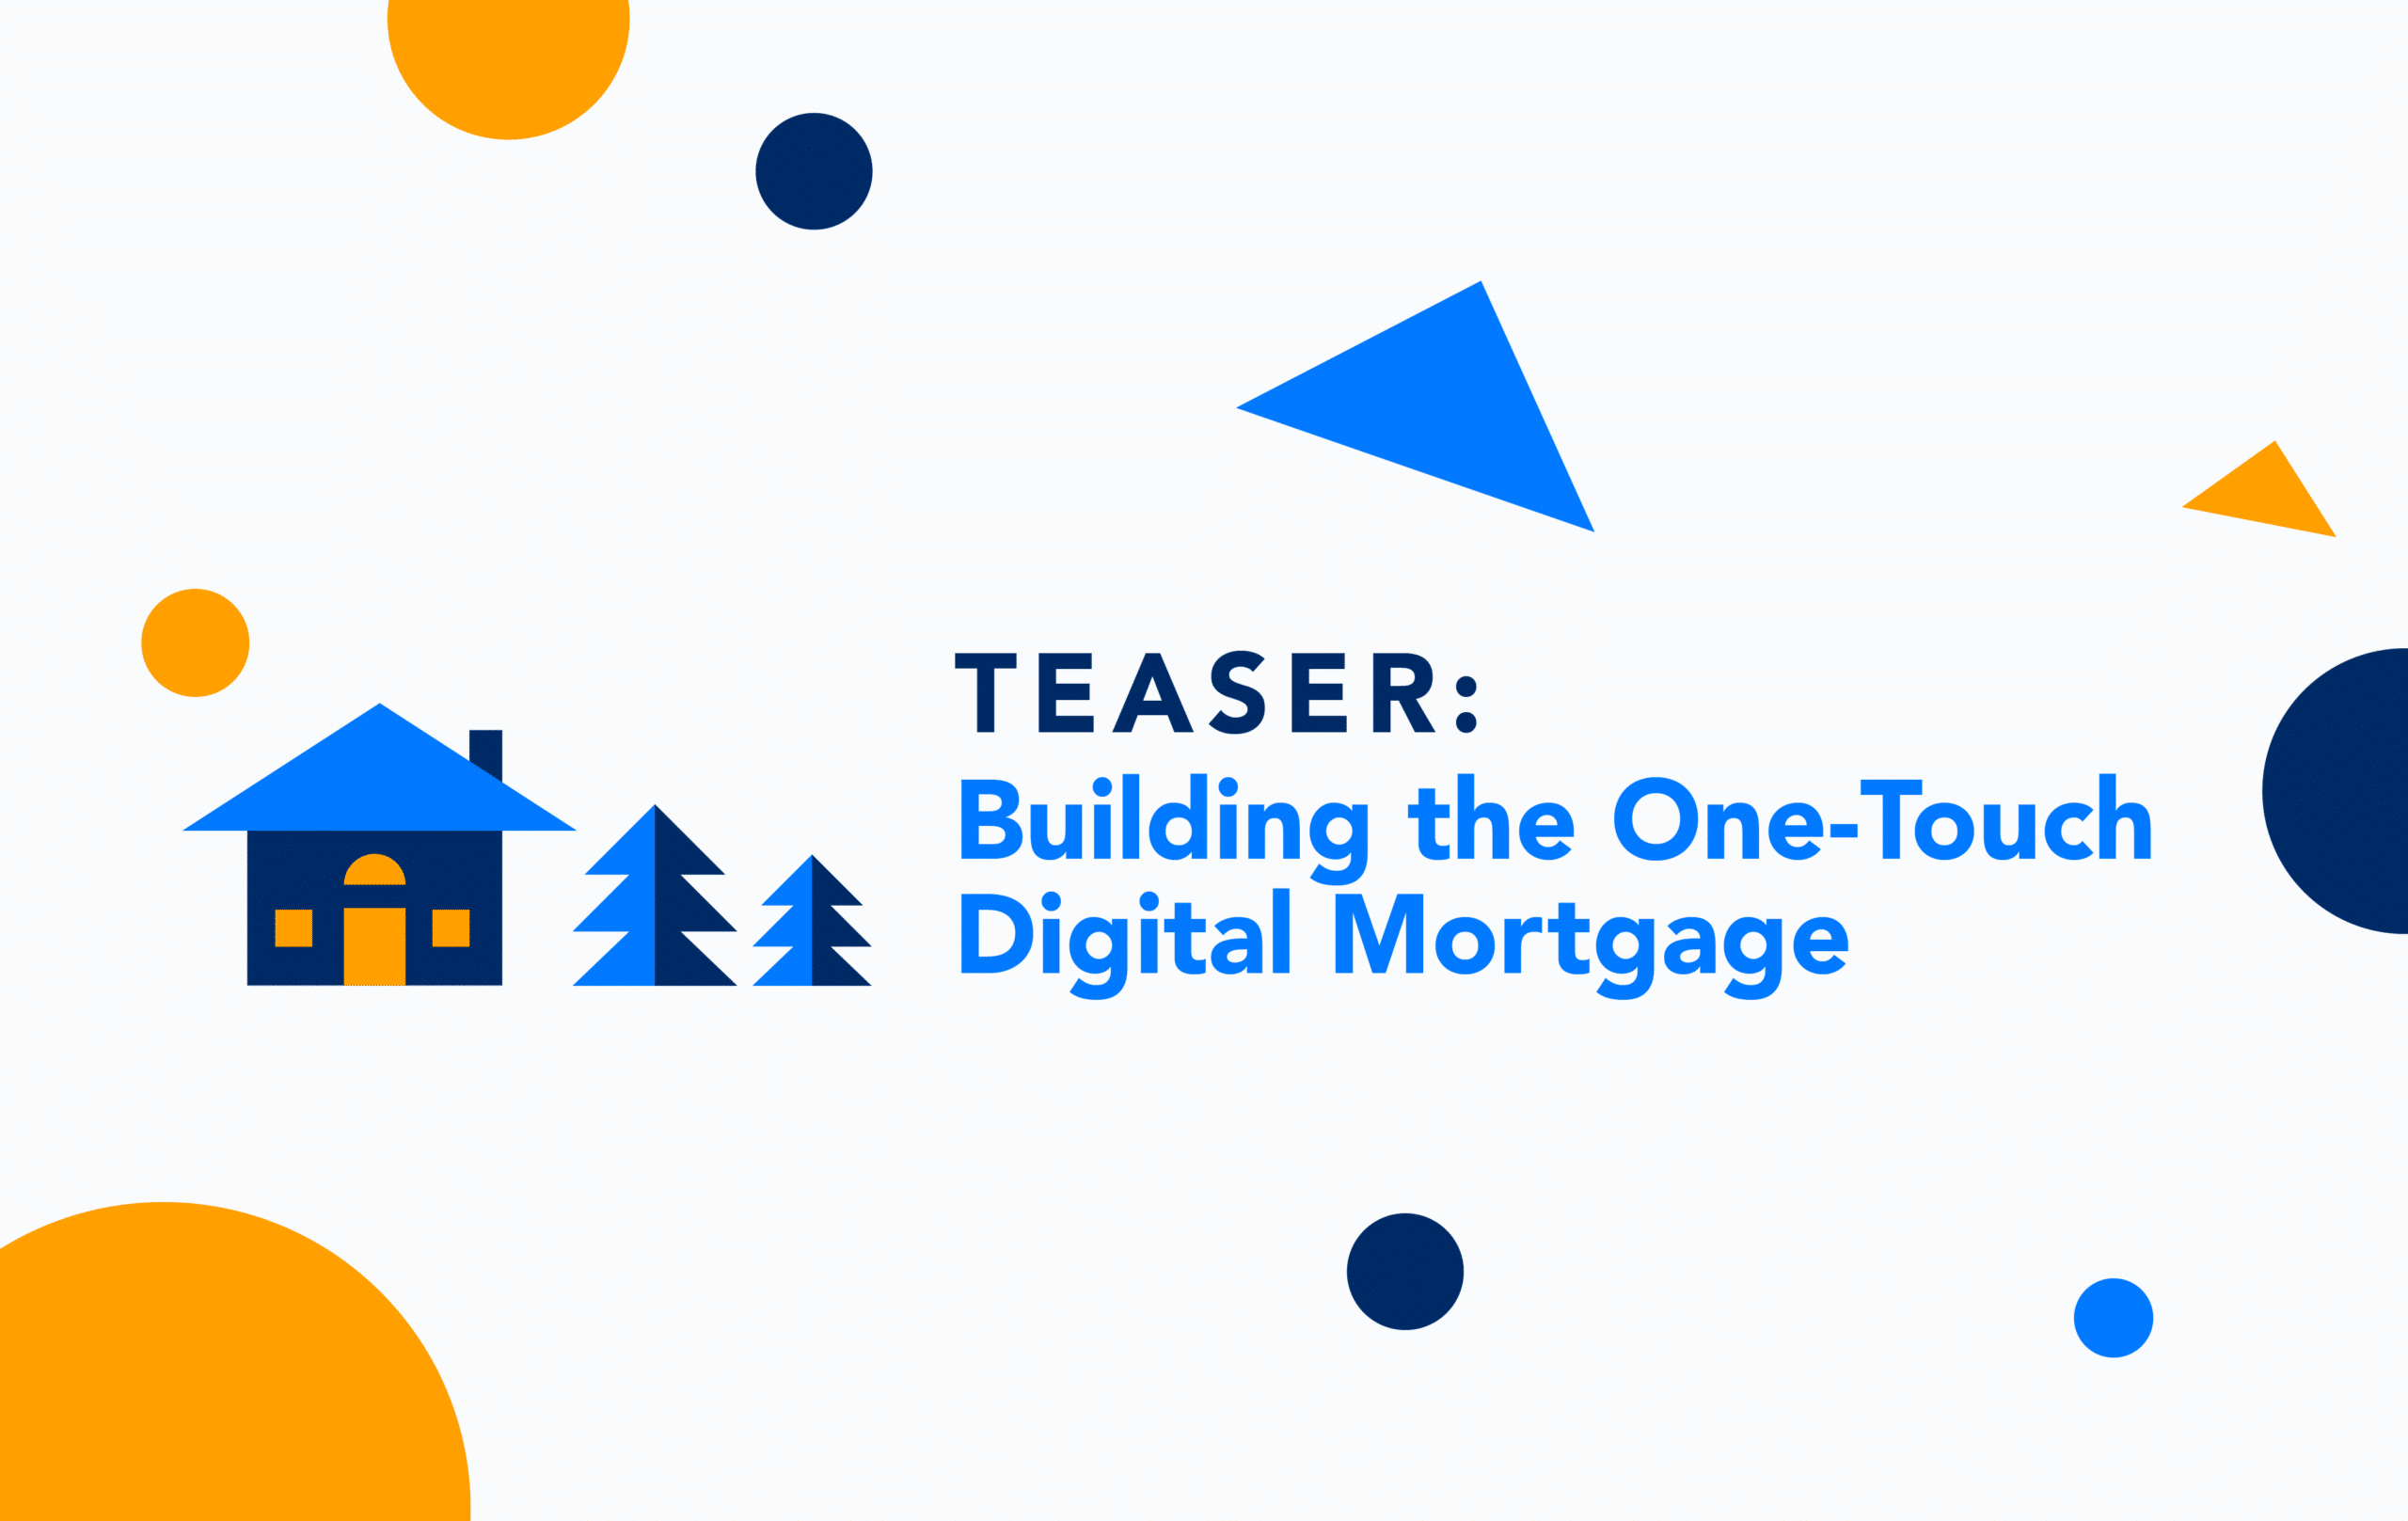 Teaser: Building the One Touch Digital Mortgage